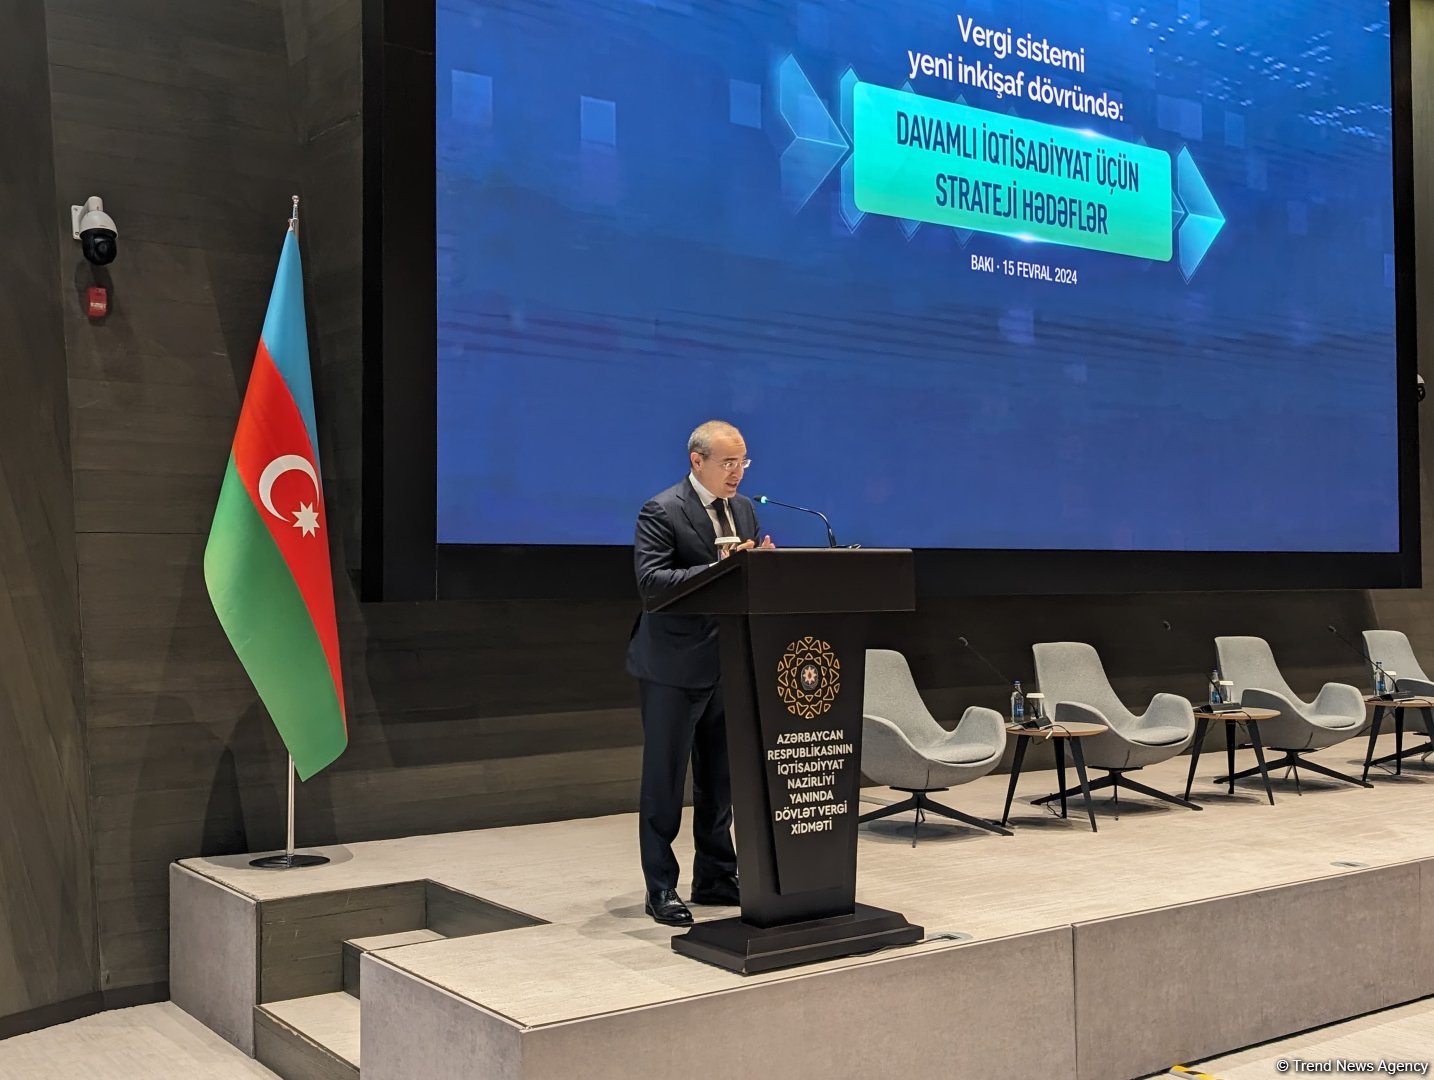 Azerbaijan's economy starts year with positive signs - acting minister